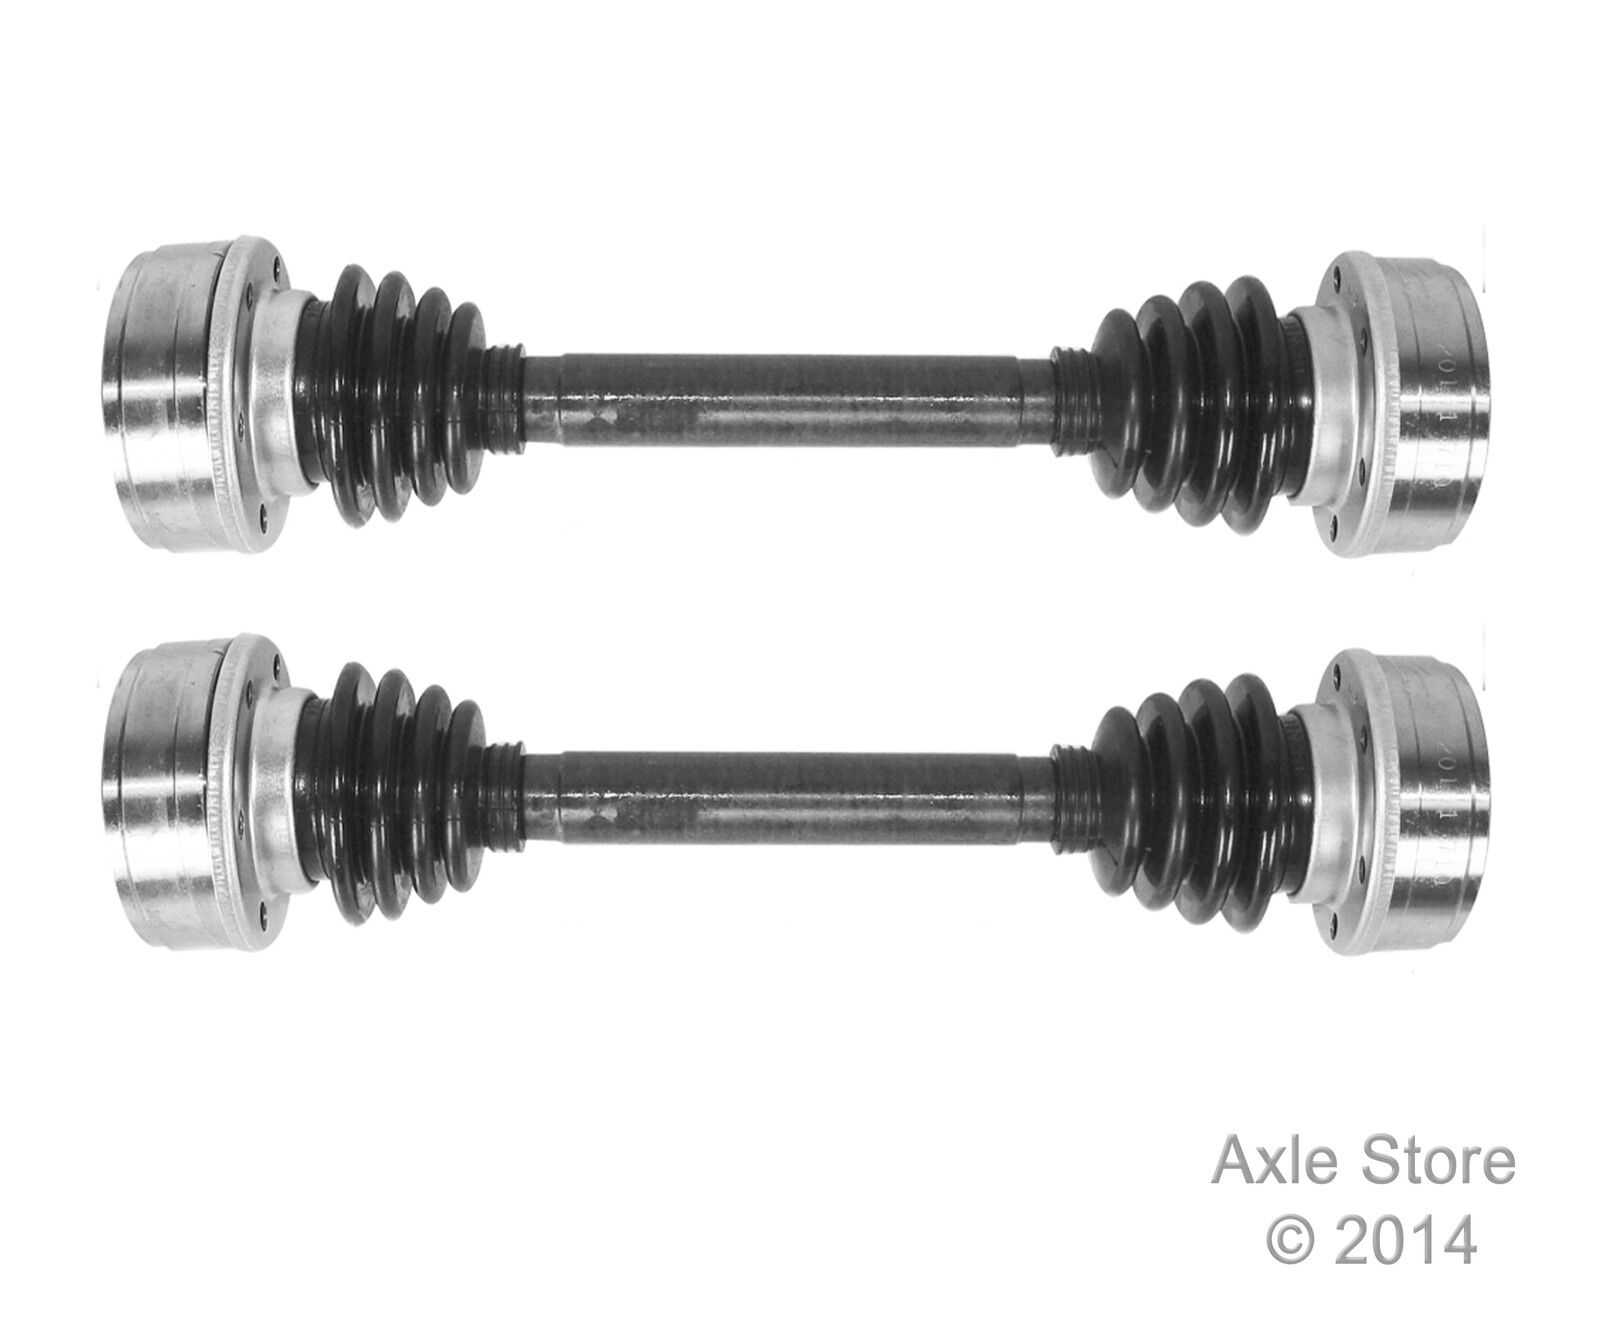 2 New CV Axles Rear Pair Fit Porsche 924 944 Vanagon With Manual Transmission